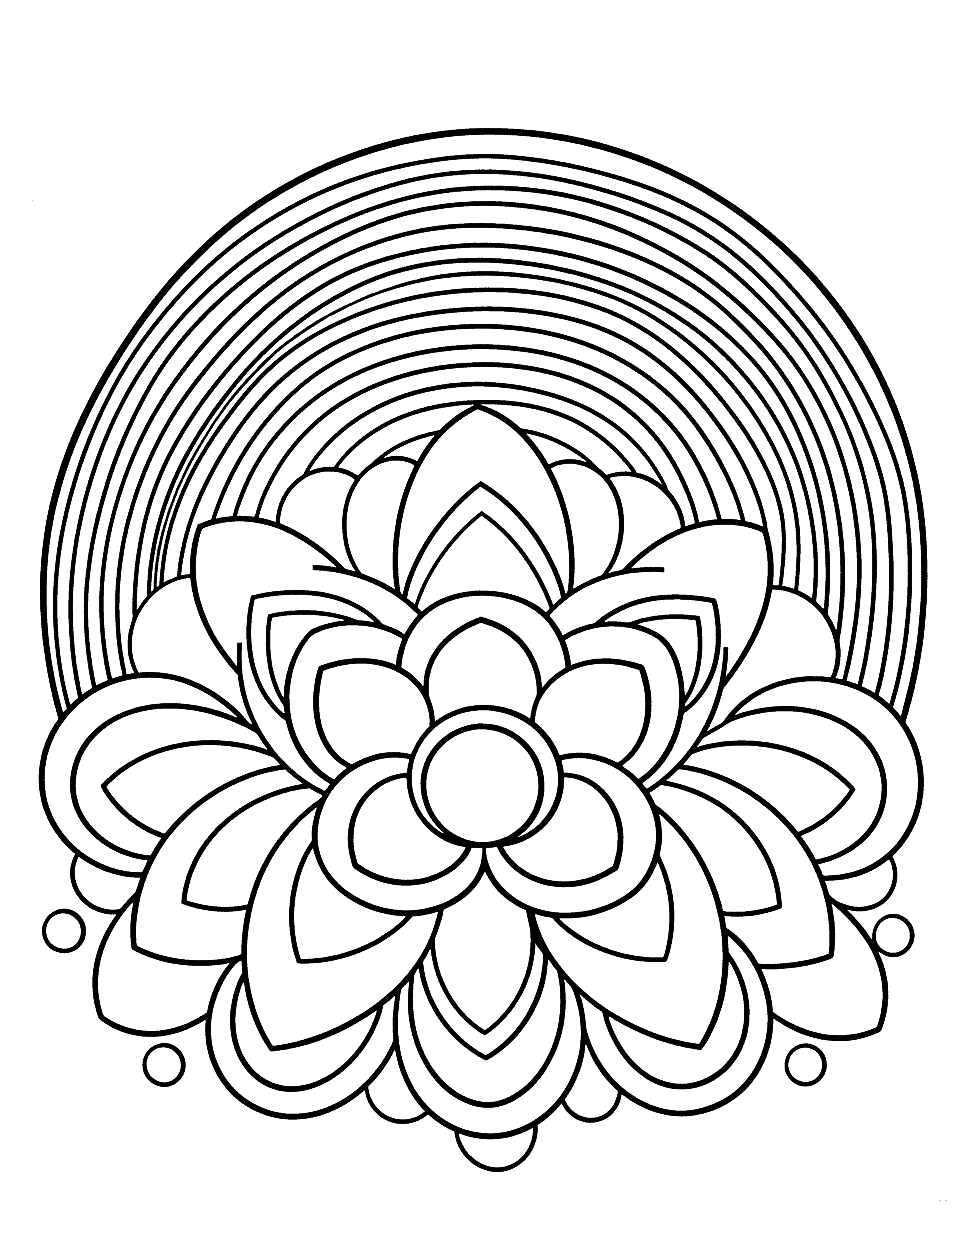 Rainbow Mandala Coloring Page - A detailed mandala design incorporating rainbow colors for older kids.